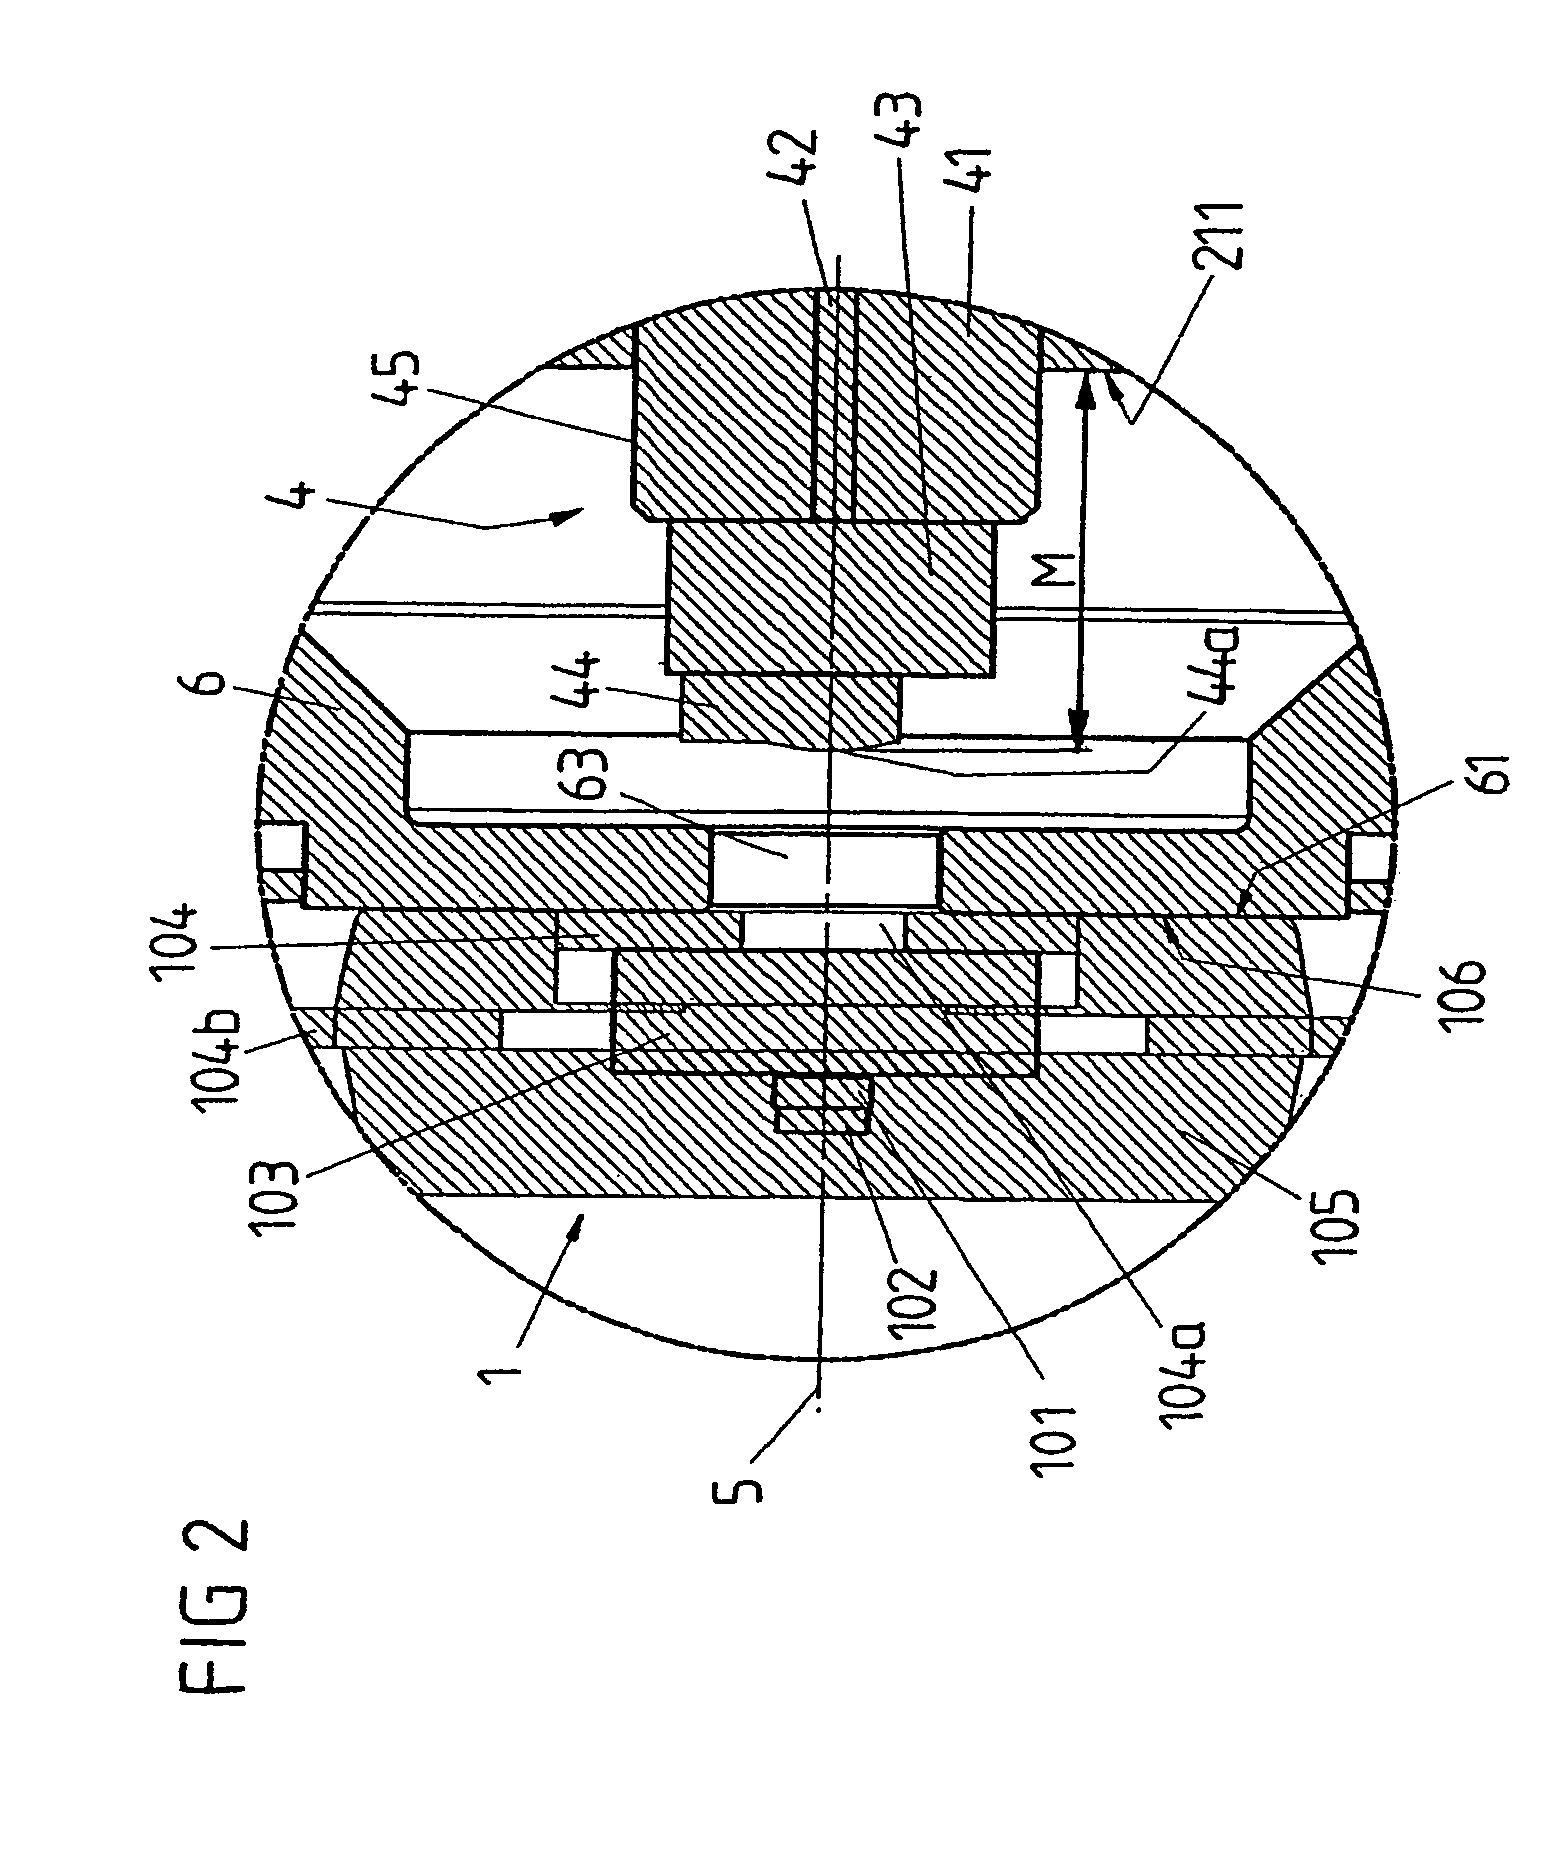 Optoelectronic transmission and/or reception arrangement